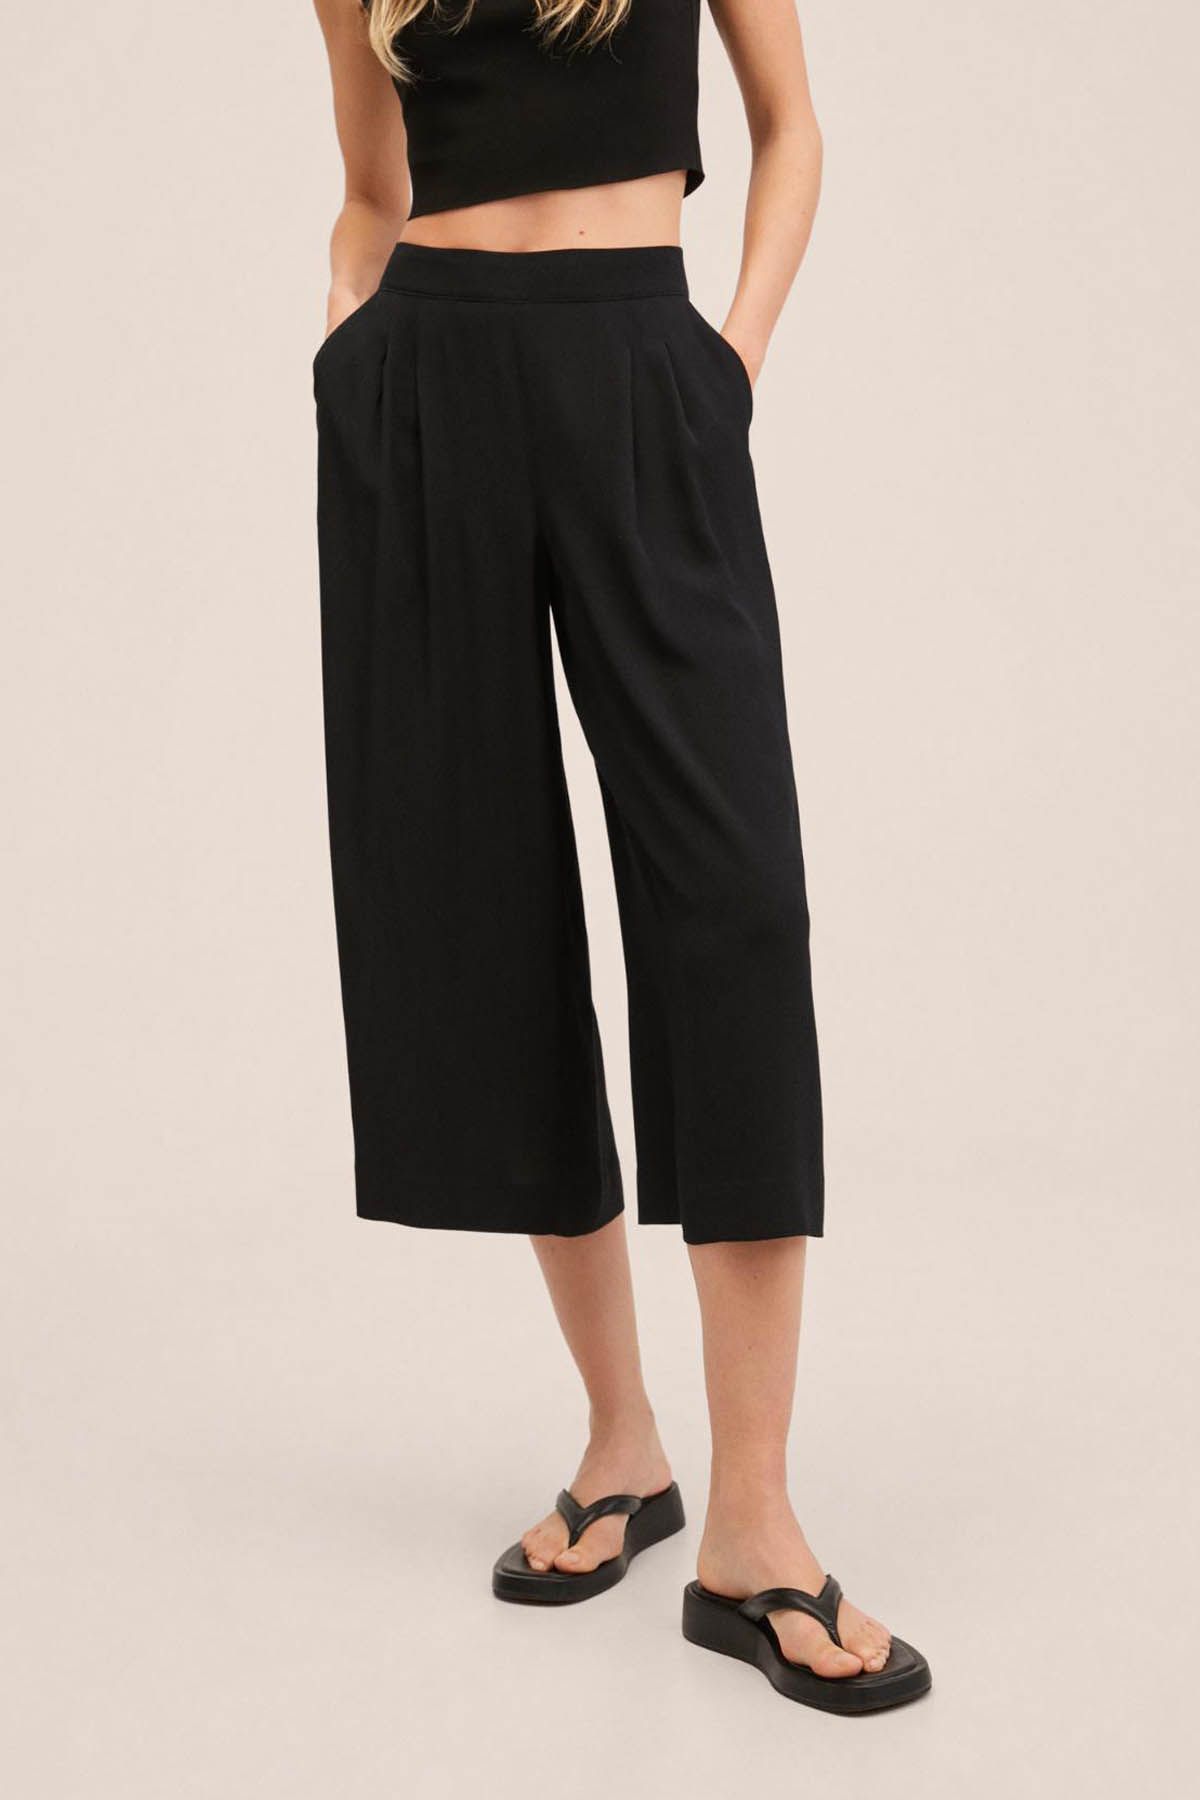 Culottes - Buy Culottes online in India